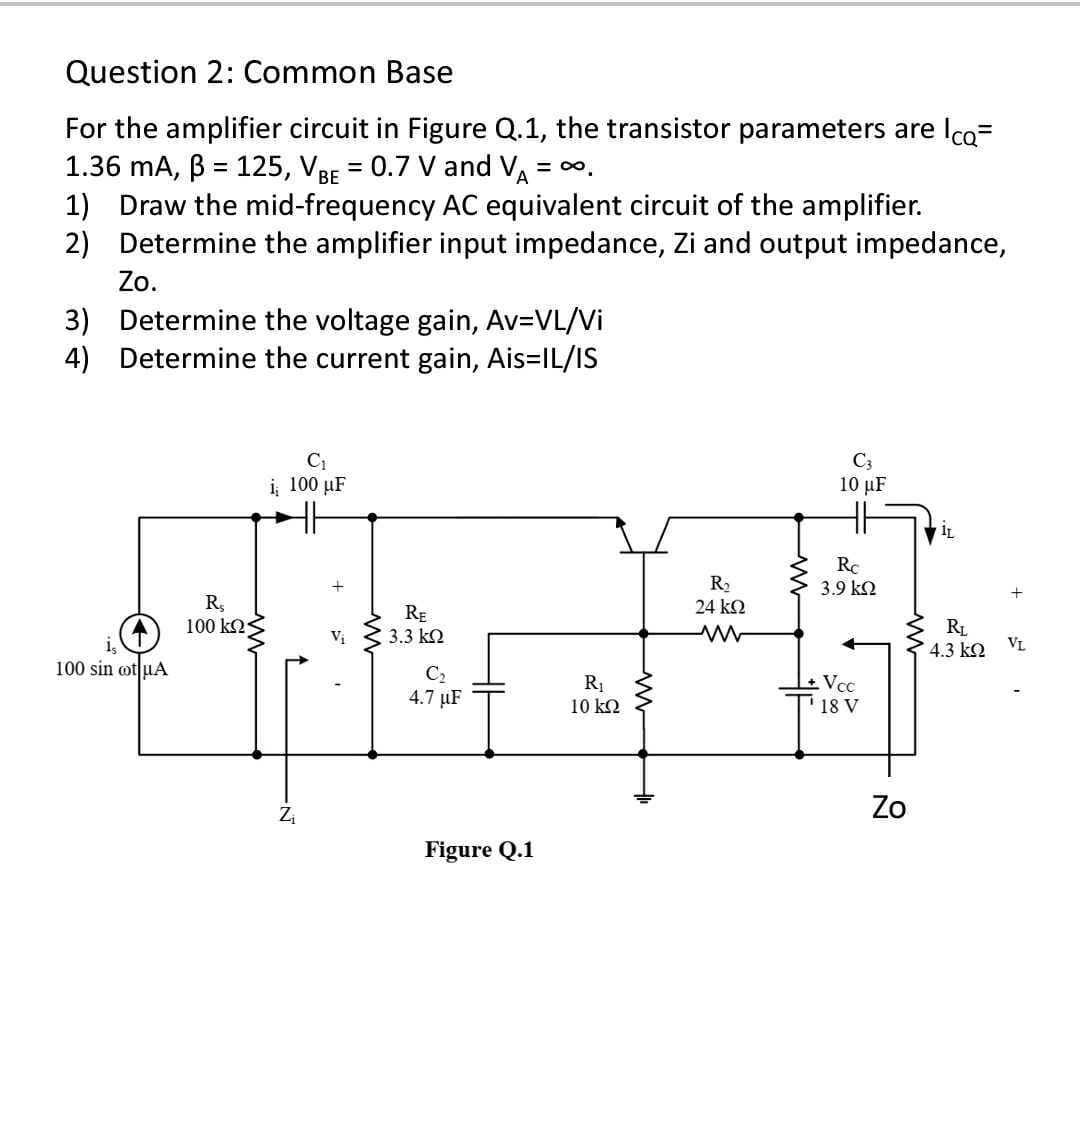 Question 2: Common Base
For the amplifier circuit in Figure Q.1, the transistor parameters are Ica=
1.36 mA, B = 125, VBE = 0.7 V and V = .
1) Draw the mid-frequency AC equivalent circuit of the amplifier.
2) Determine the amplifier input impedance, Zi and output impedance,
%3D
Zo.
3) Determine the voltage gain, Av=VL/Vi
4) Determine the current gain, Ais=IL/IS
C3
10 μΕ
i 100 µF
R2
24 k2
Rc
3.9 k2
RE
3.3 k2
100 k2
RL
4.3 k2
Vị
VL
100 sin ot uA
C2
4.7 µF
Vcc
18 V
10 kQ
Zo
Figure Q.1
